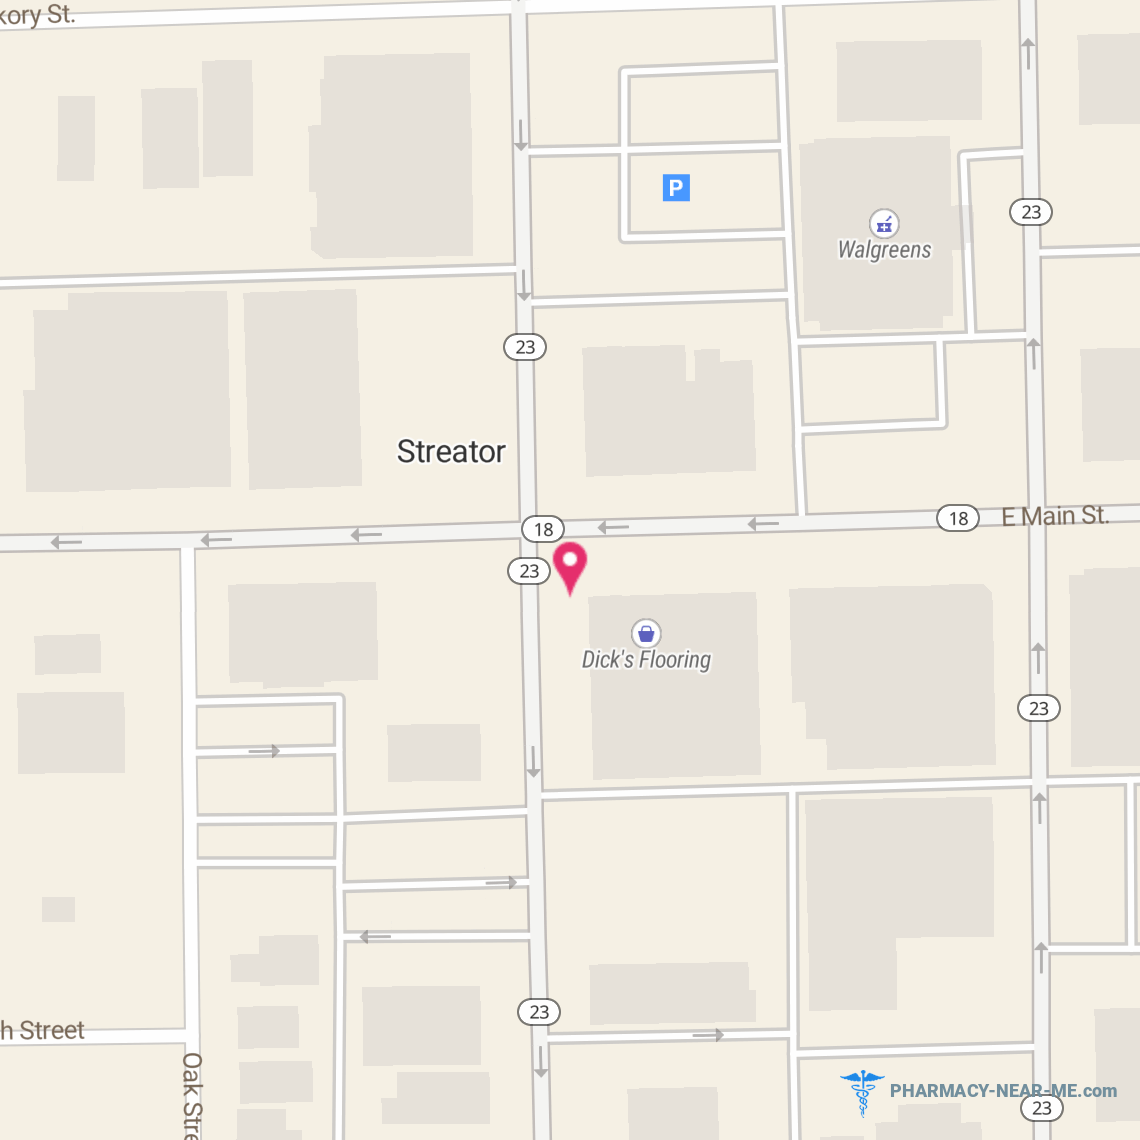 STREATOR DRUGS - Pharmacy Hours, Phone, Reviews & Information: 109 East Main Street, Streator, Illinois 61364, United States